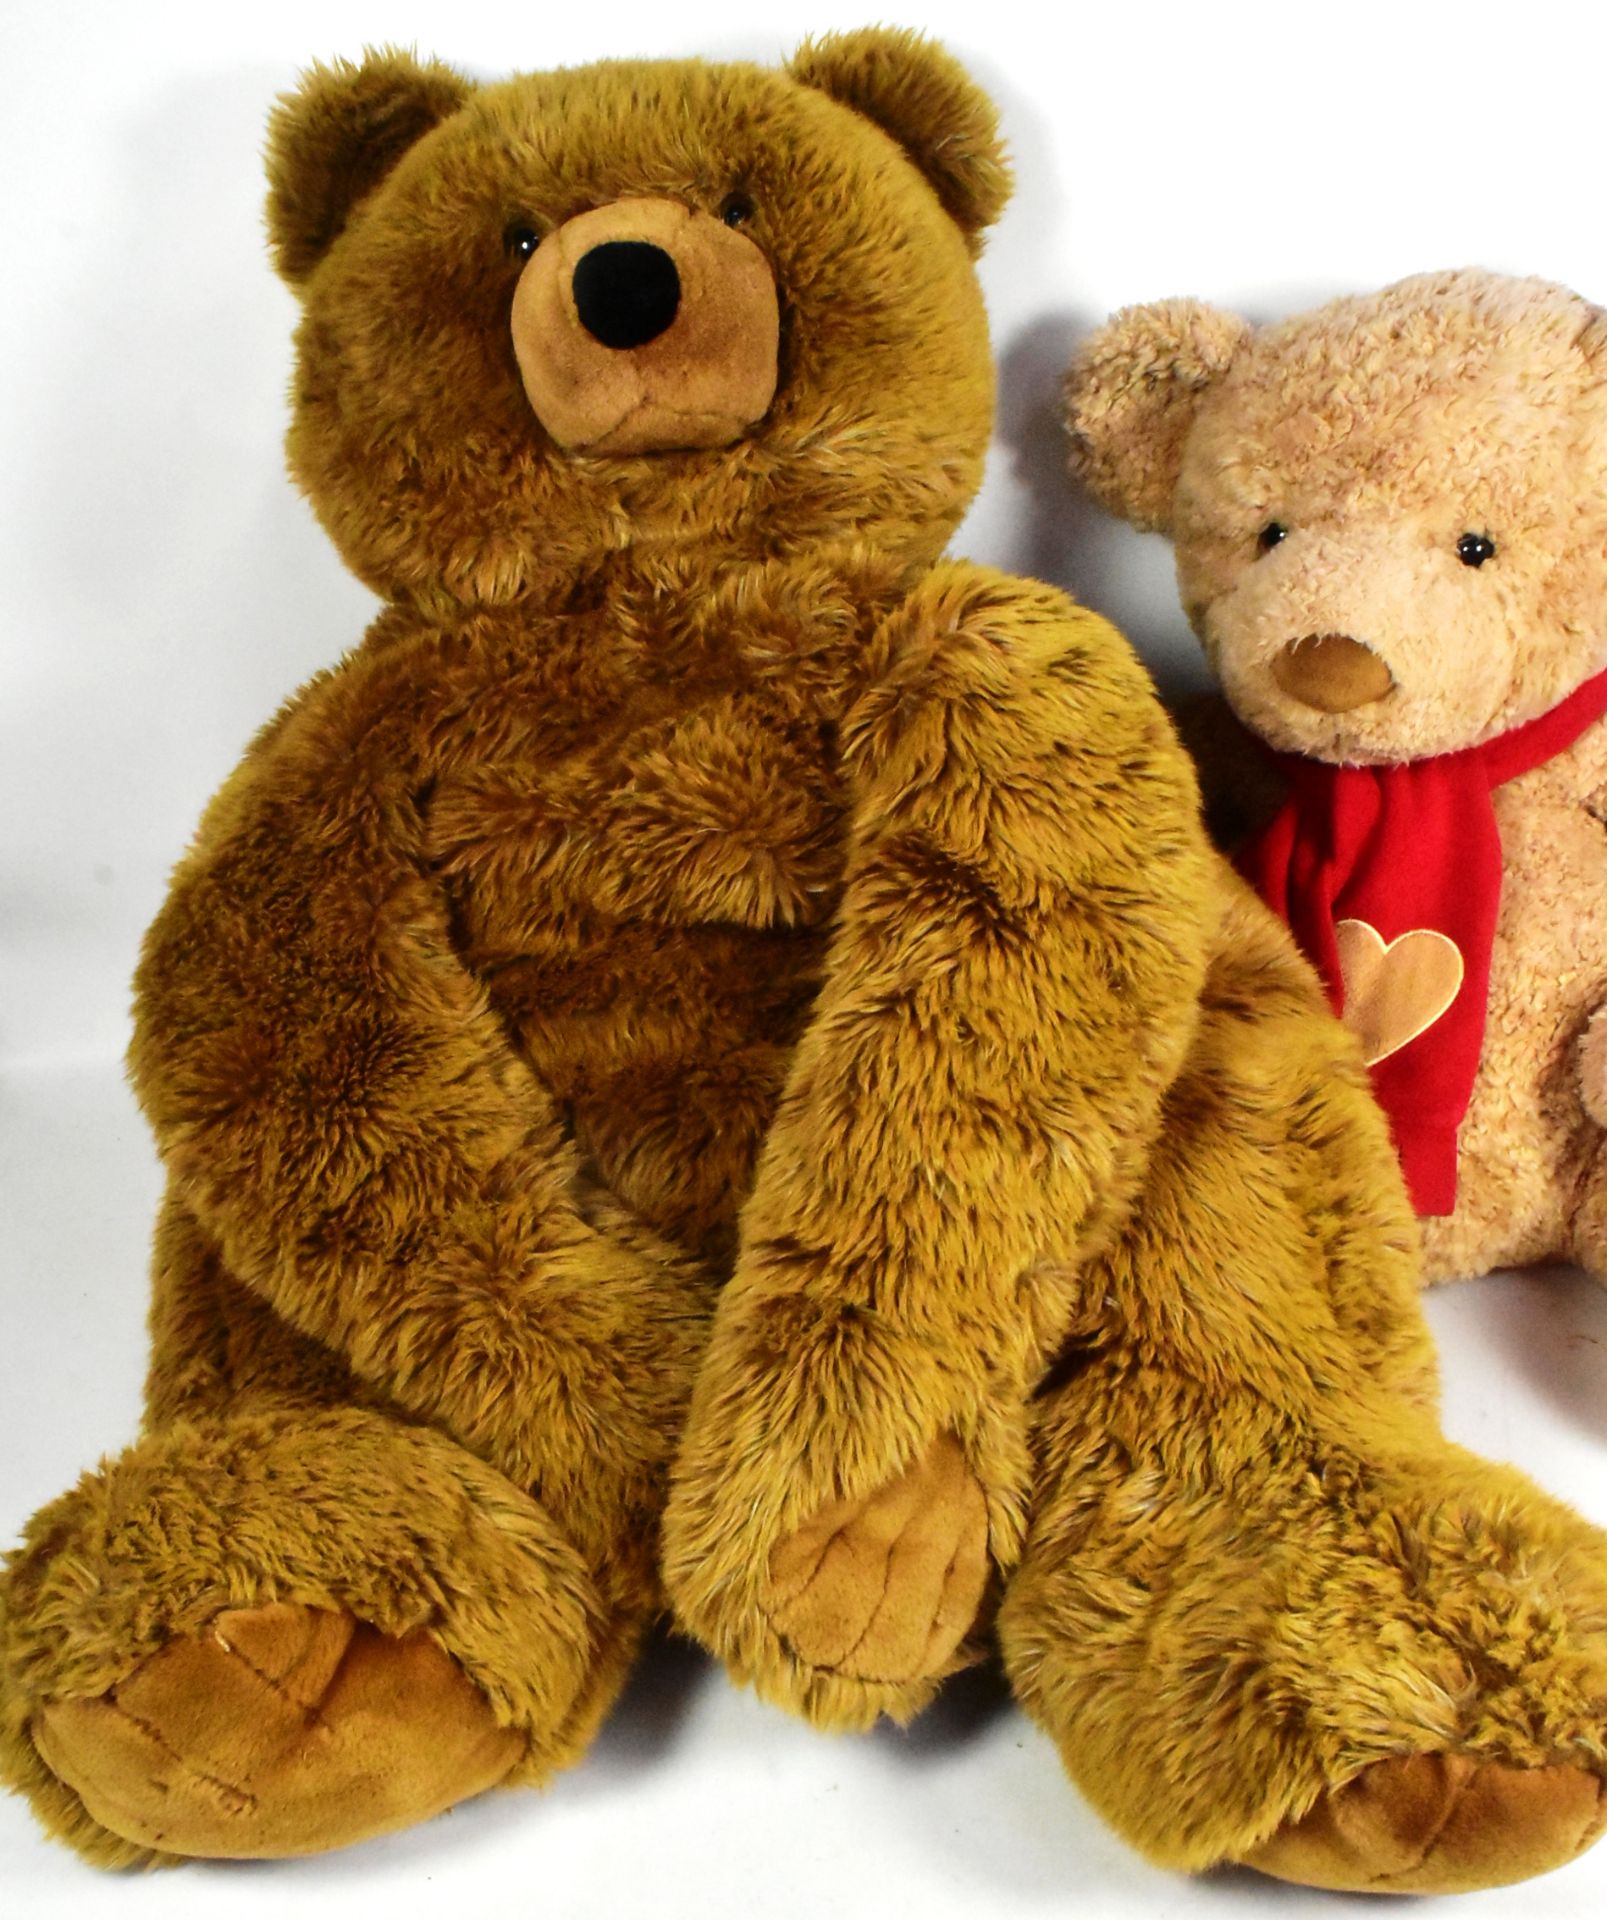 TWO LARGE SOFT TOY TEDDY BEARS - Image 2 of 4